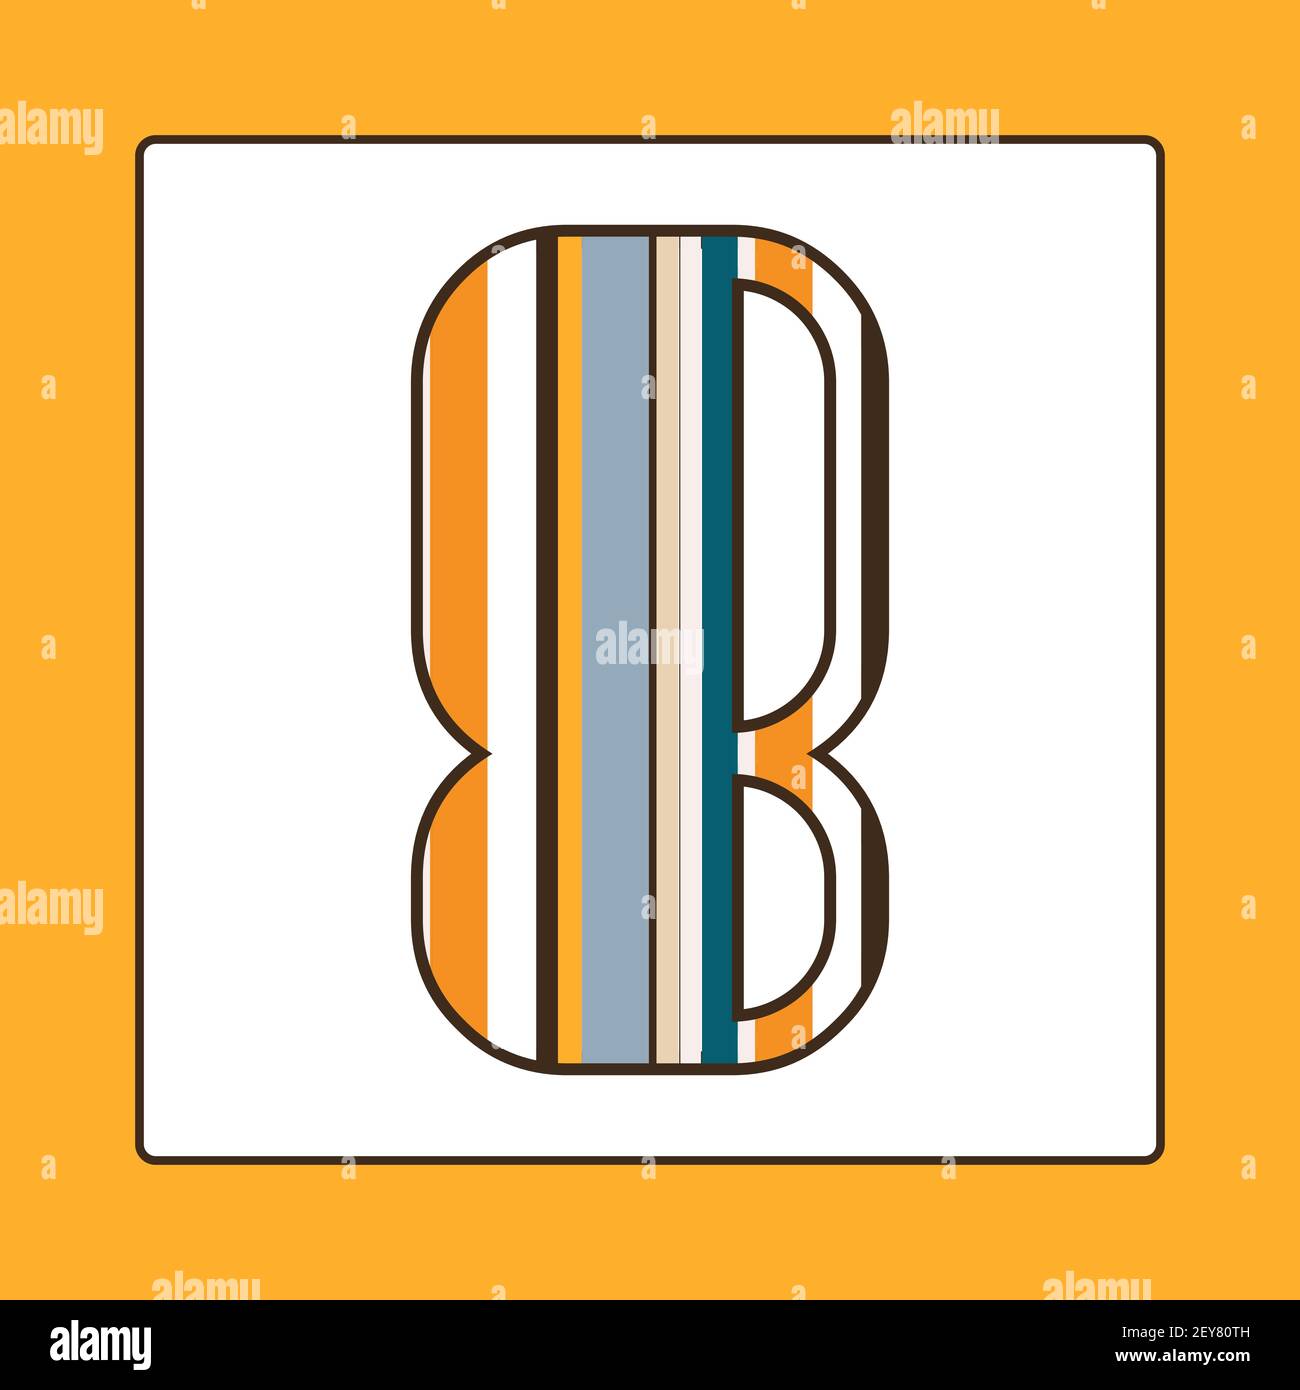 Striped colorful number eight isolated on white background. Elements for kids cards or alphabets in vintage or retro style. Stock Vector